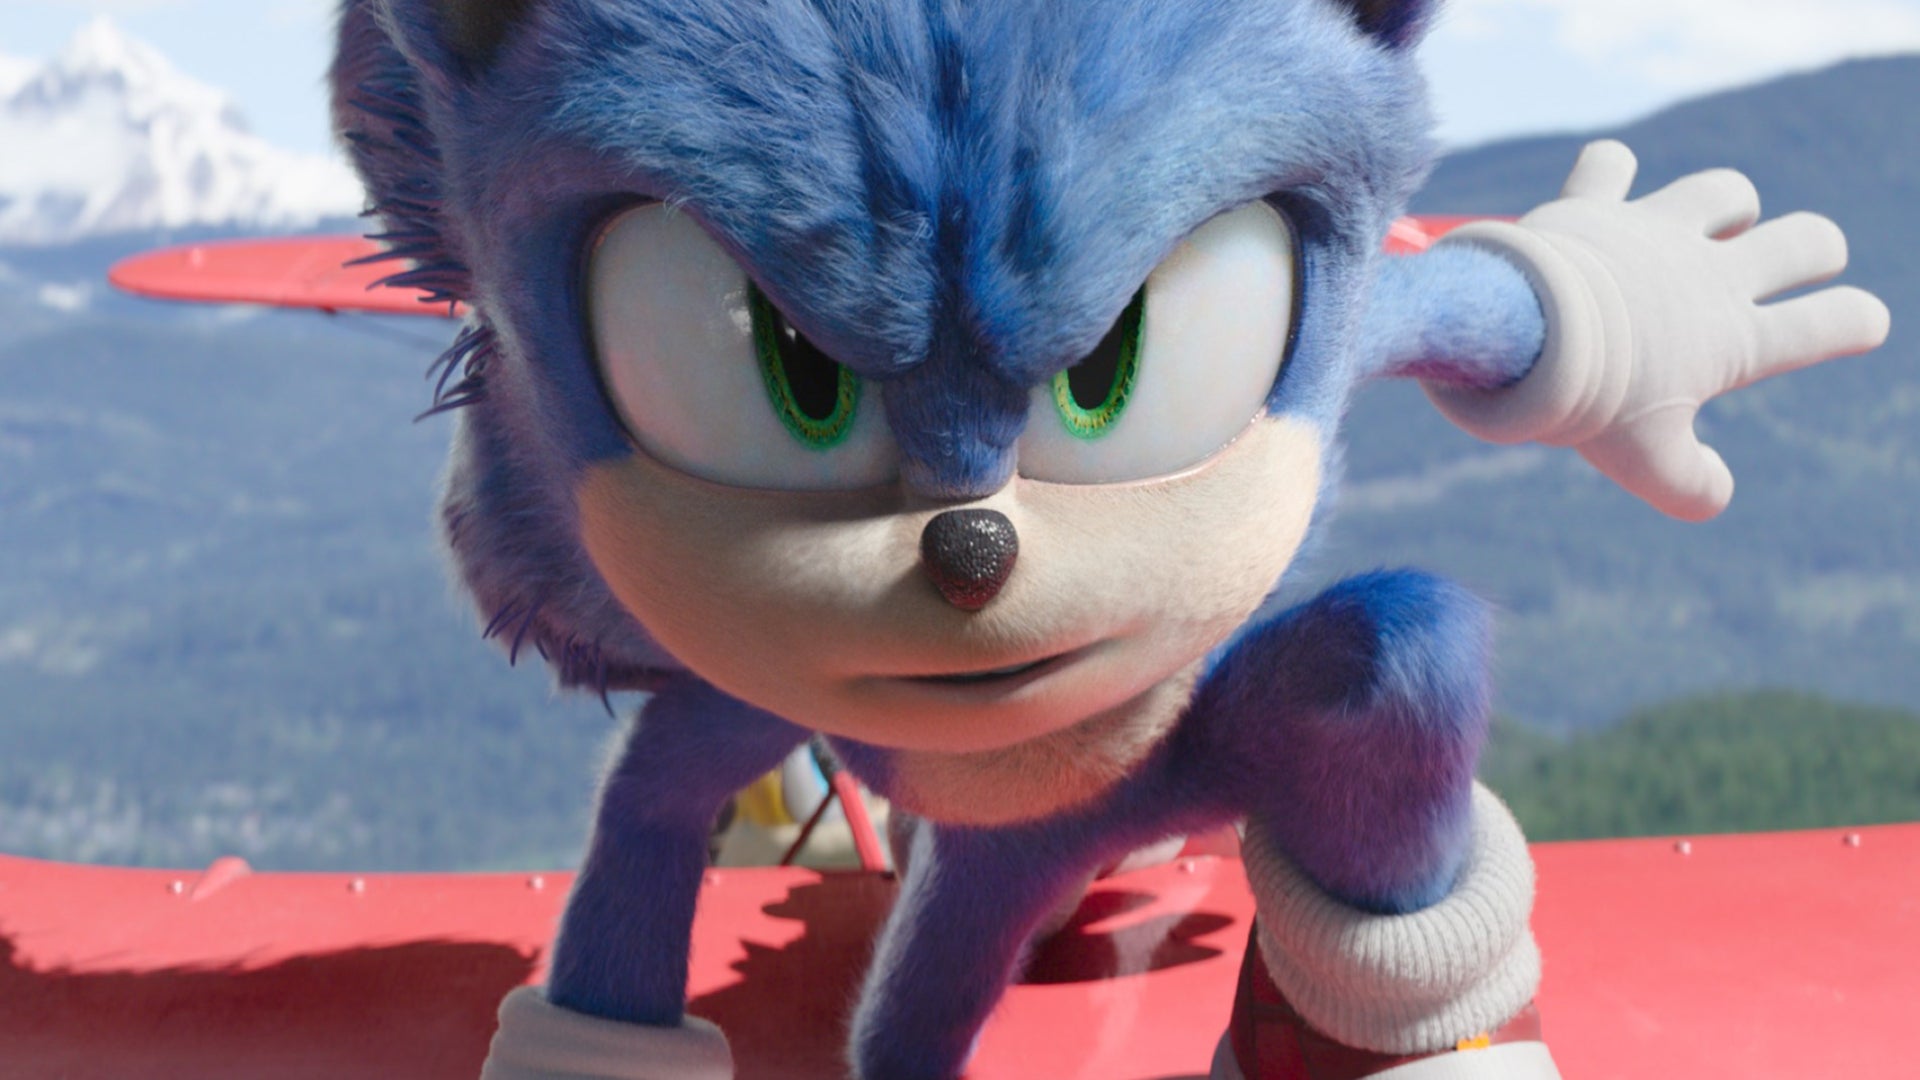 Image for Sonic the Hedgehog 2 is now the highest grossing video game movie of all time